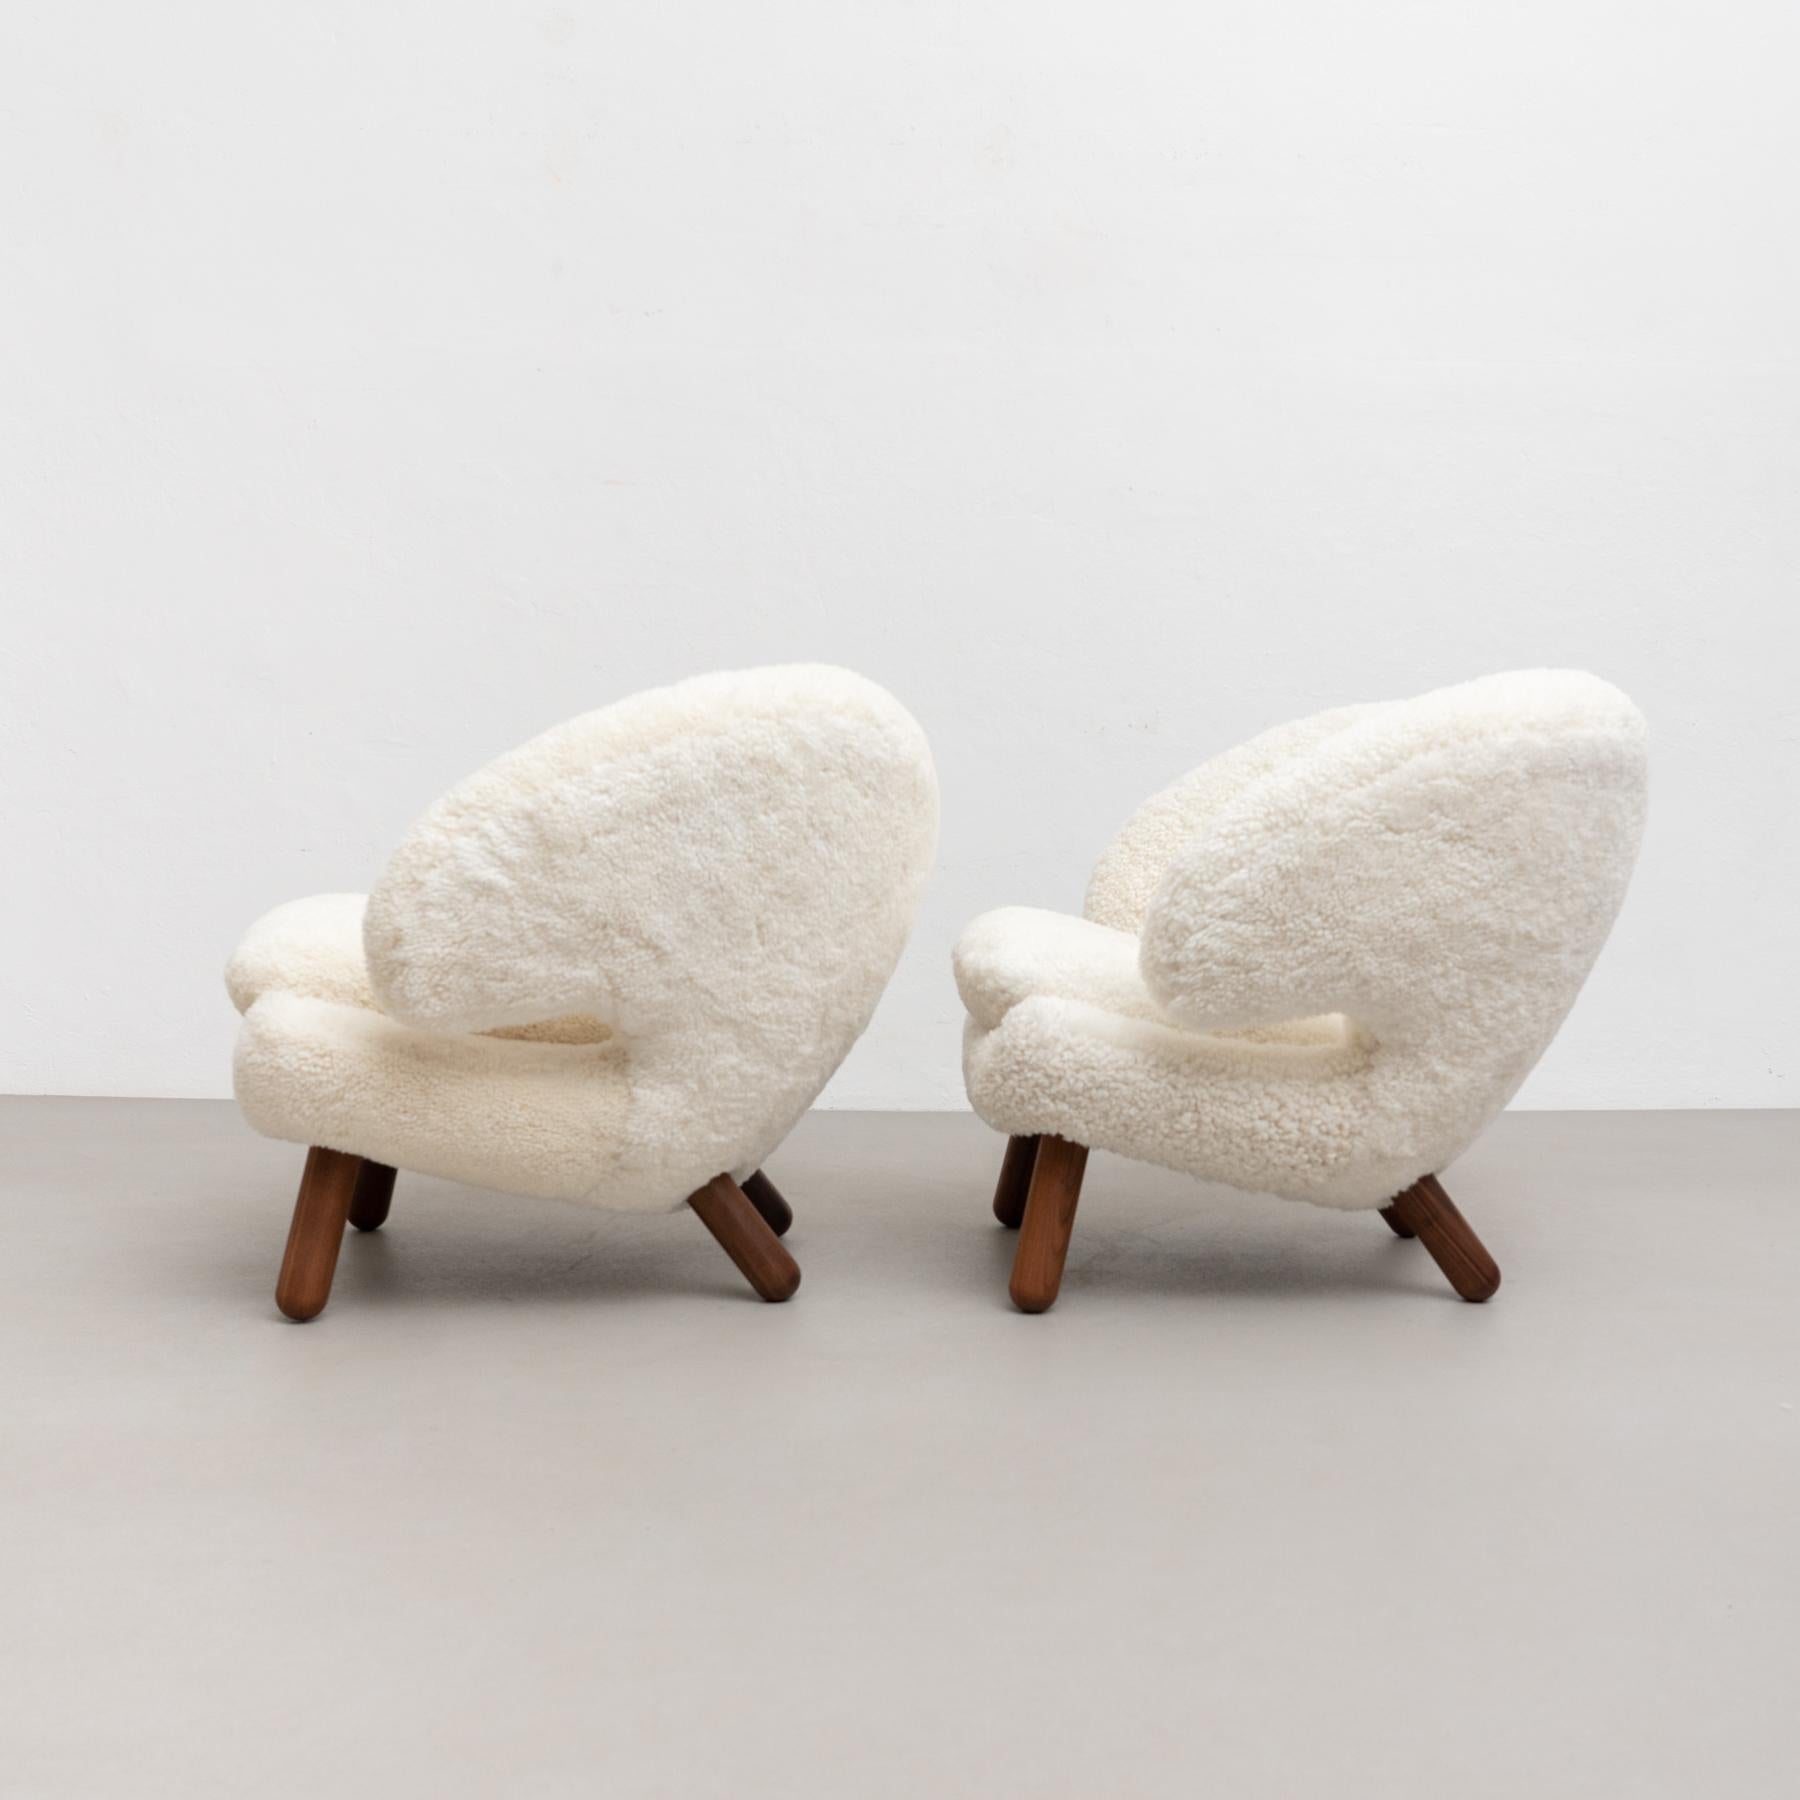 Immerse yourself in the timeless elegance of the Pelican chair, a design masterpiece by Finn Juhl dating back to 1940, and reintroduced to the world in 2001 by the House of Finn Juhl in Denmark. Upholstered in luxurious Gotland Sheepskin, each piece